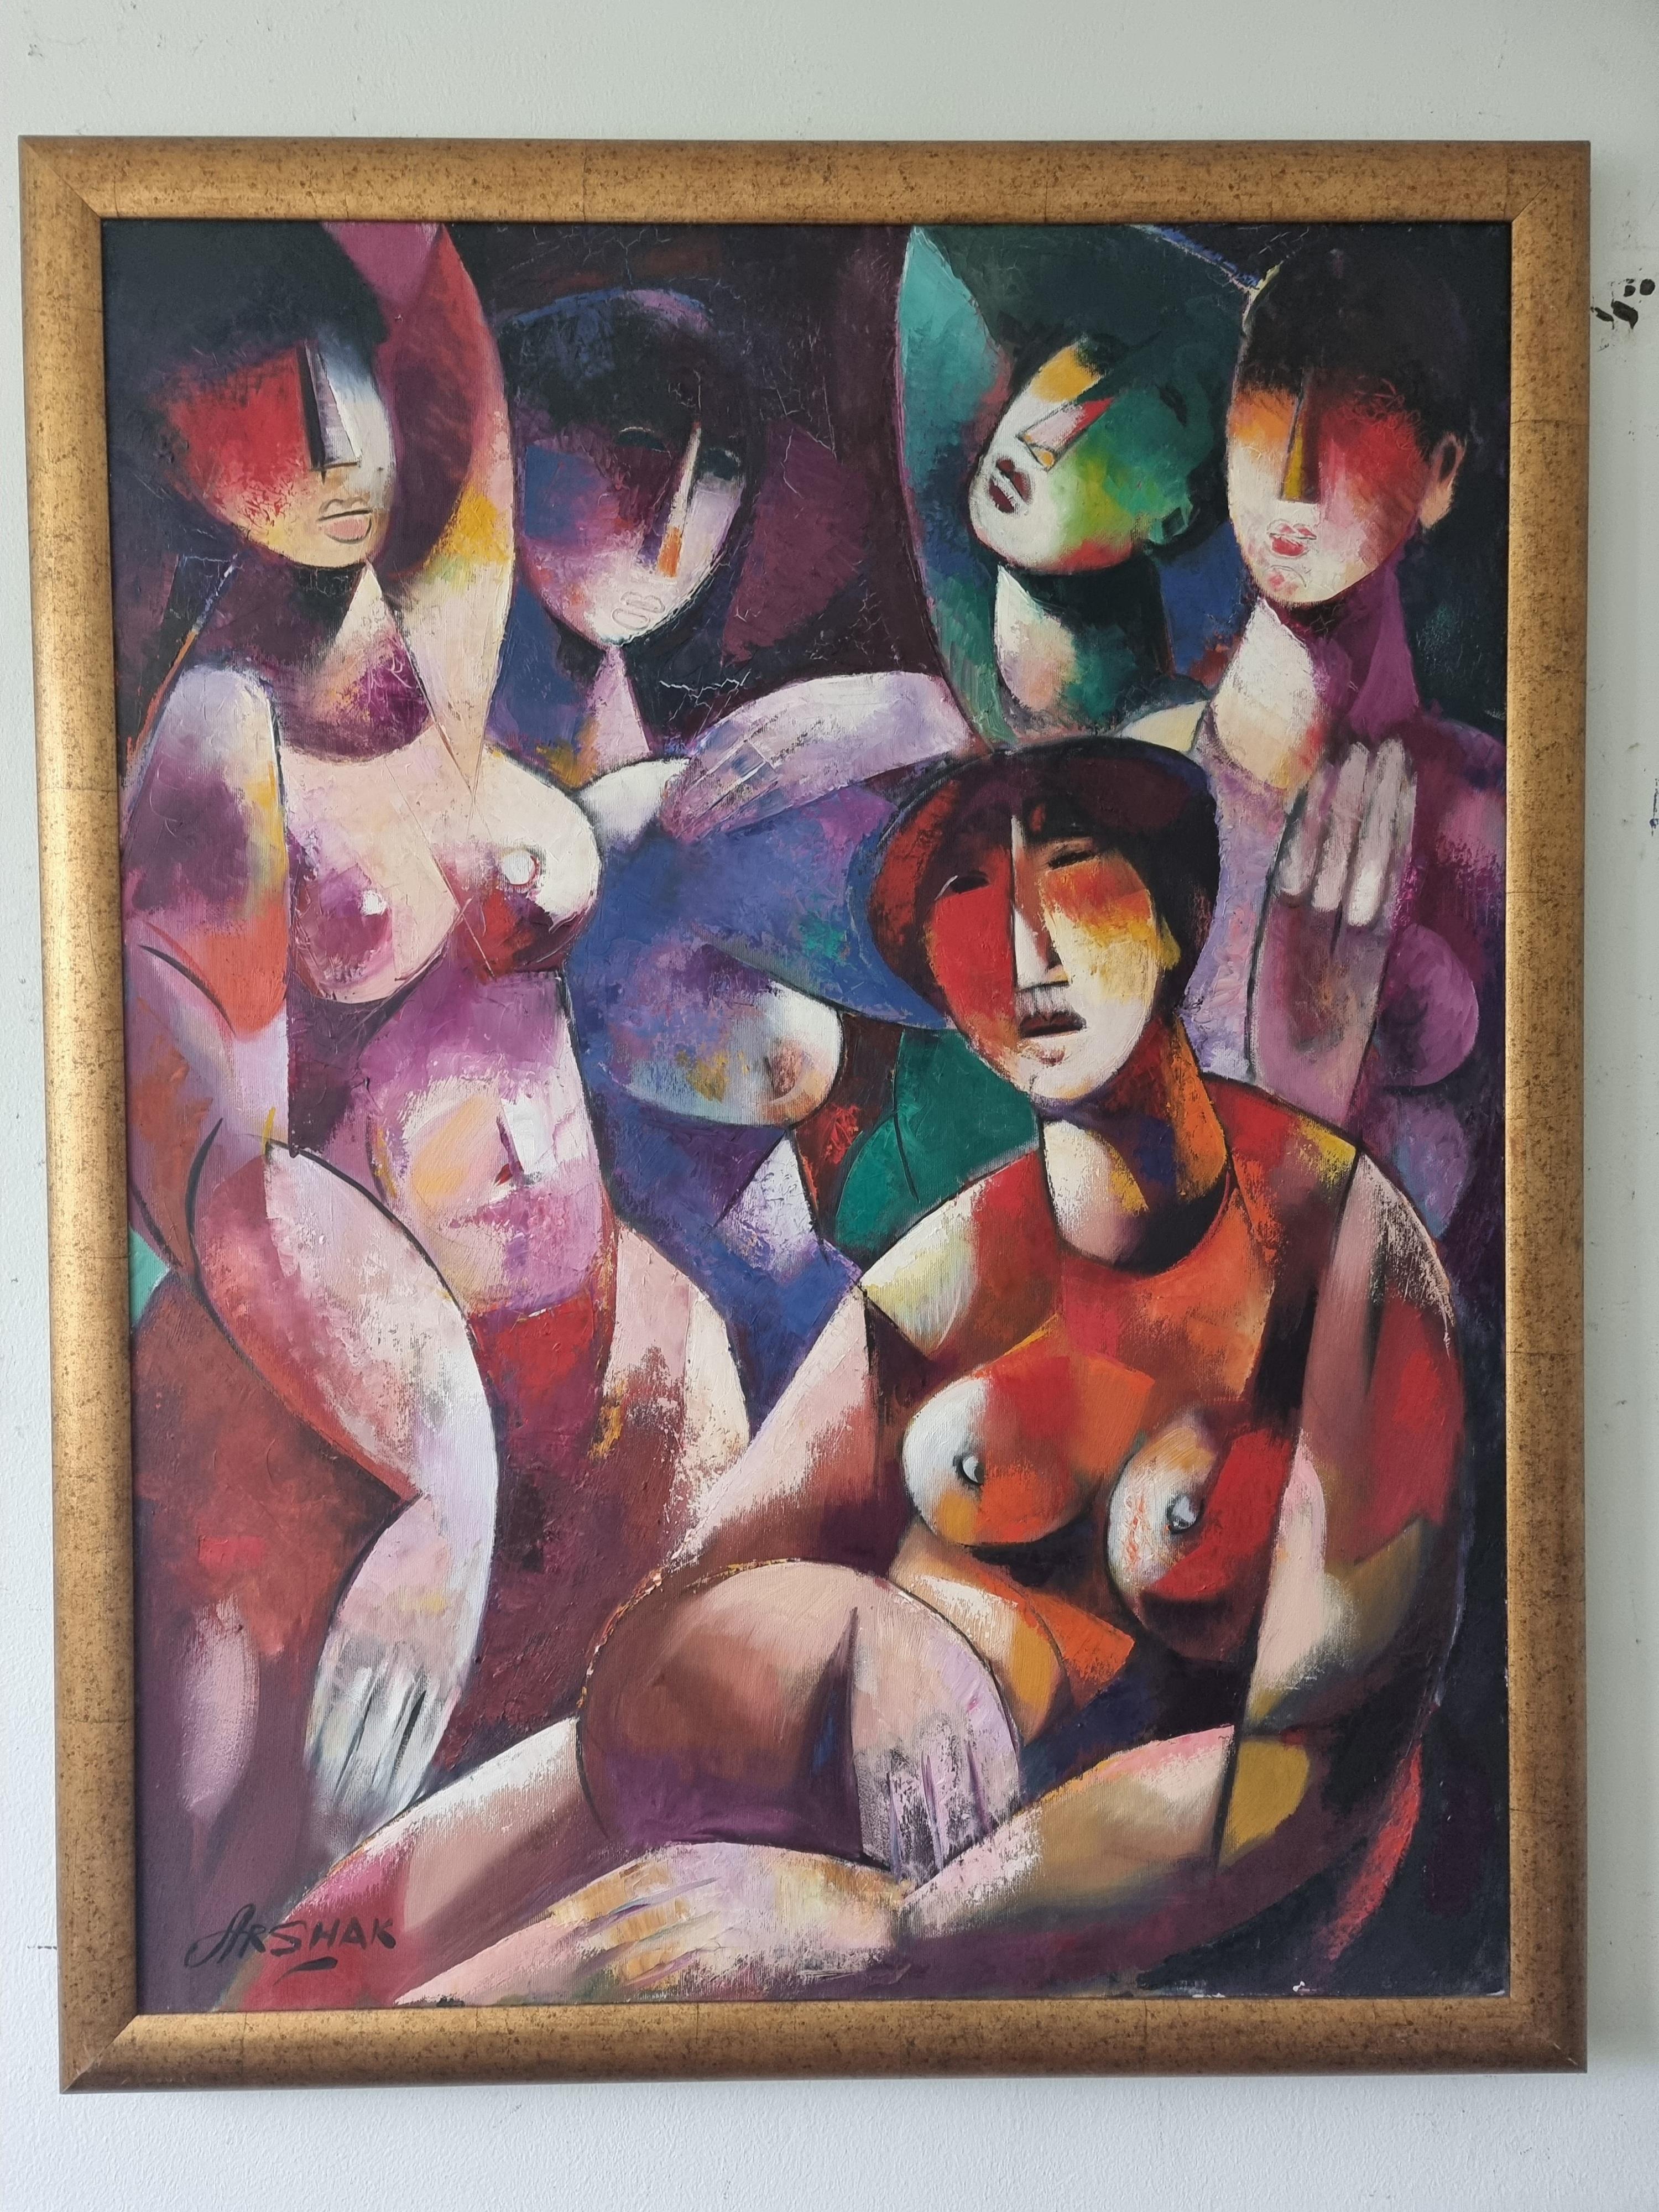 Friends - Cubist Art Red Black Yellow White Green Blue Pink Lilac - Painting by Arshak Nersisyan